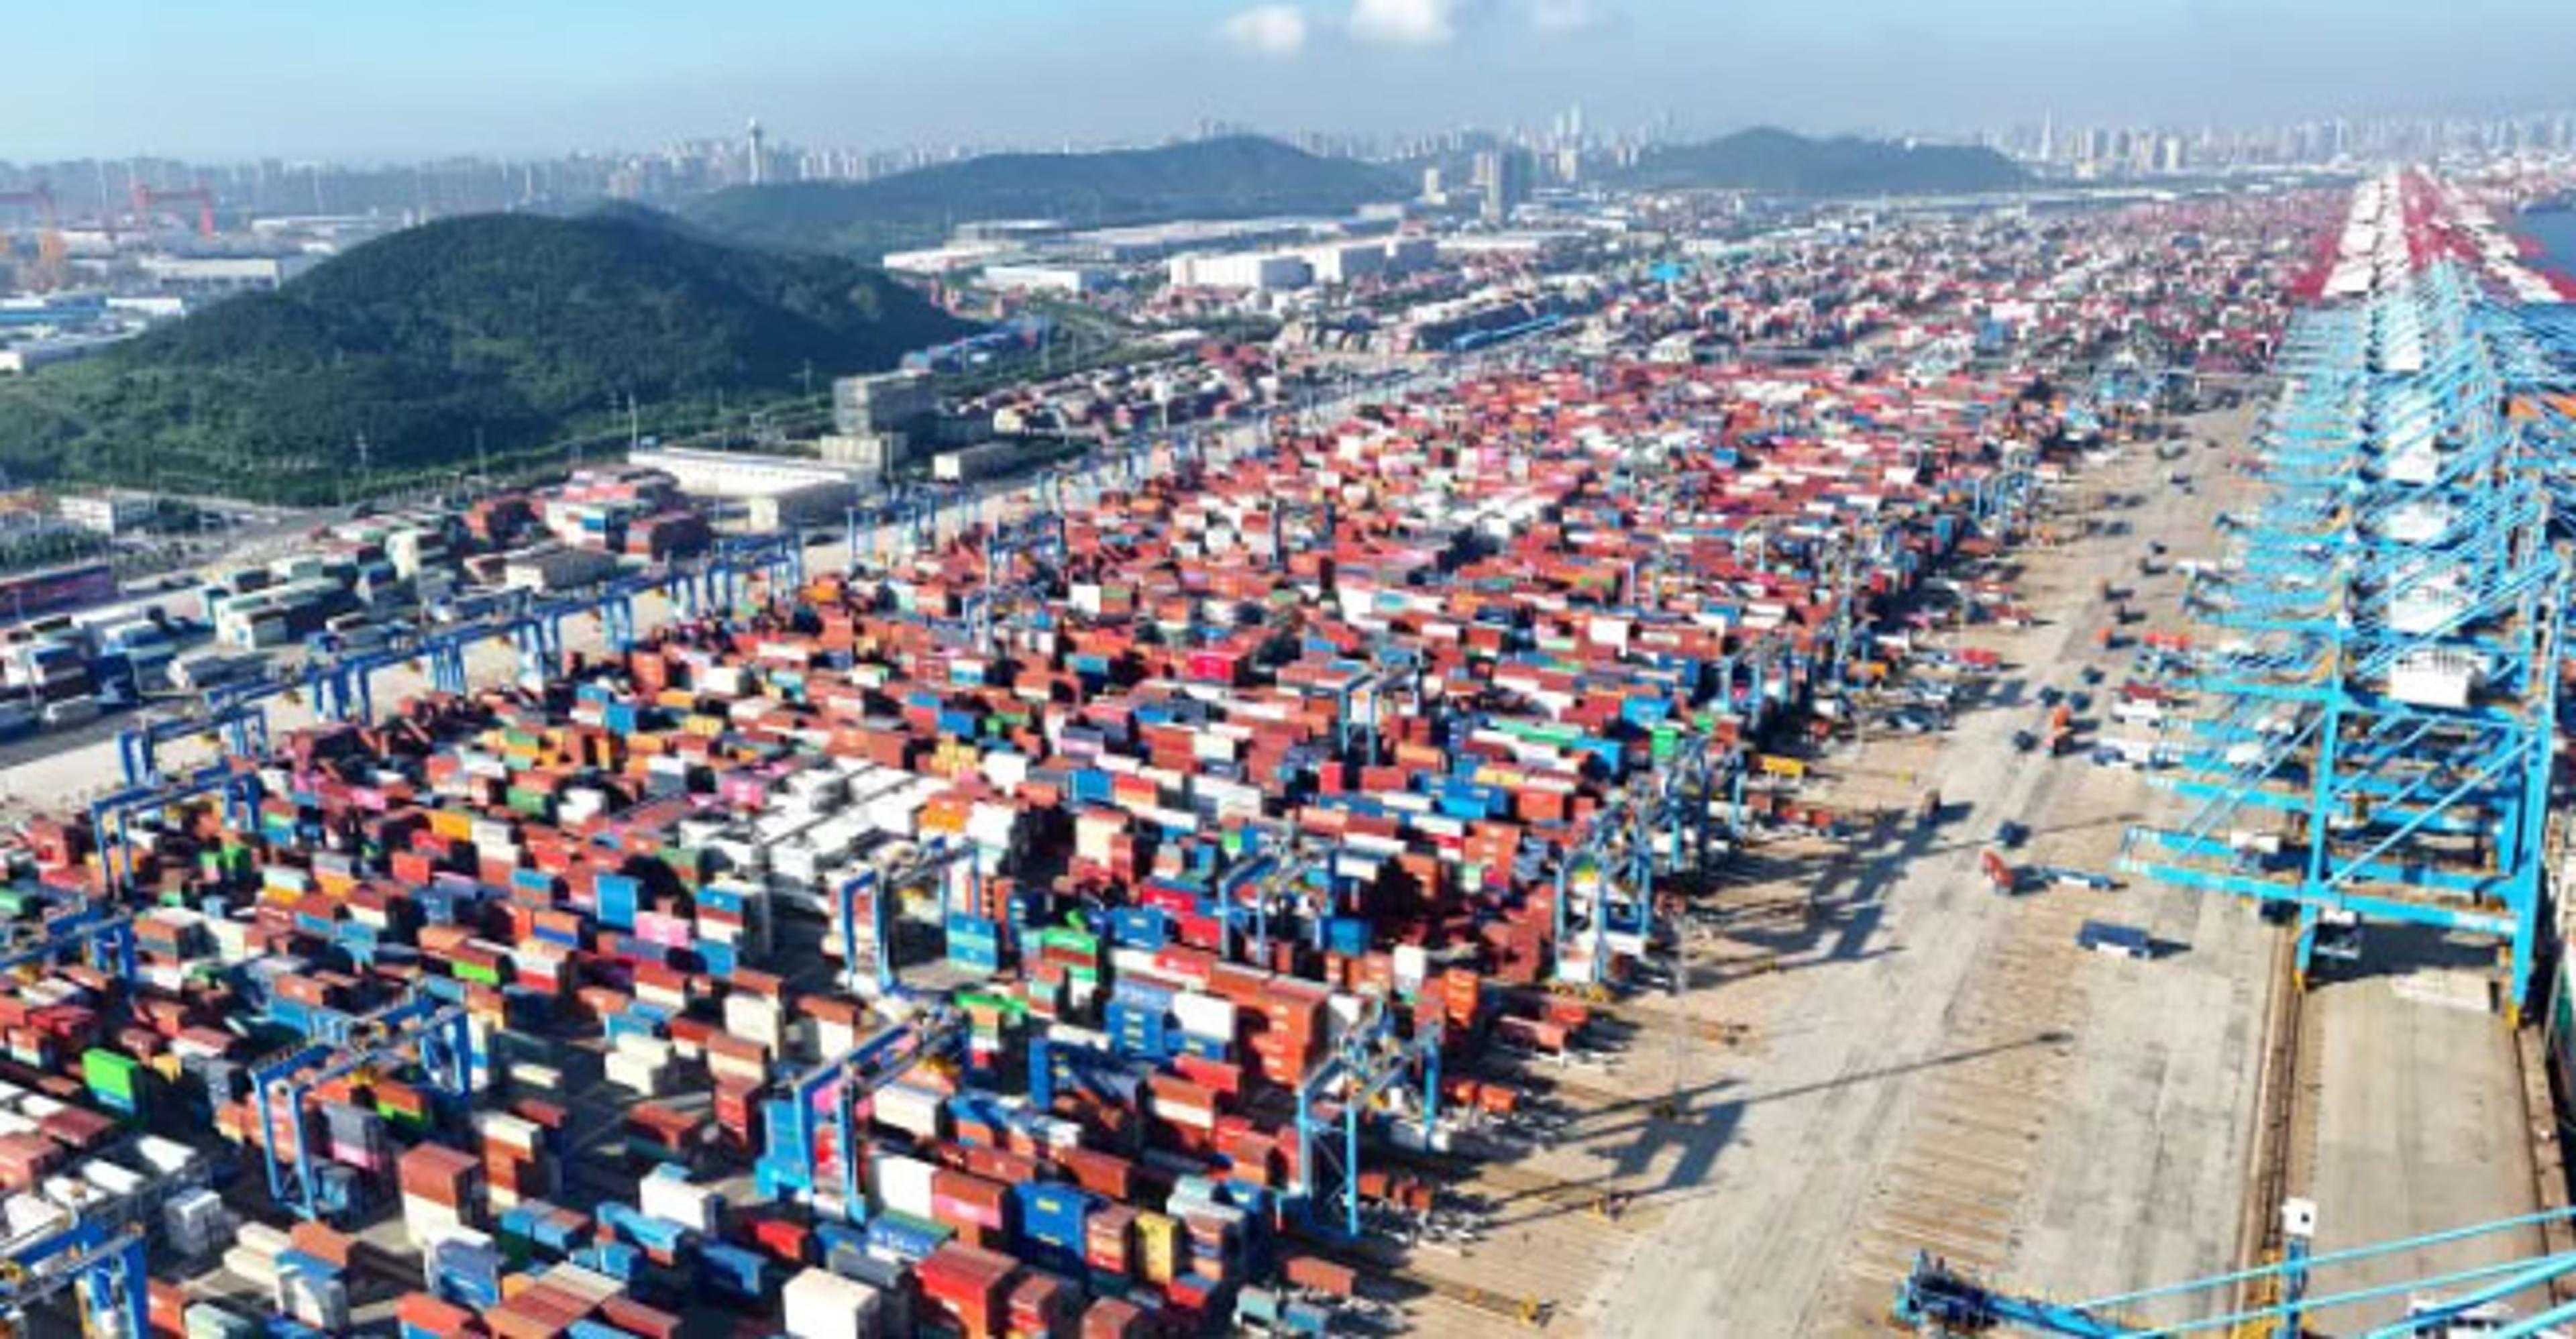 A view of the automated container port in Qingdao in east China’s Shandong province.